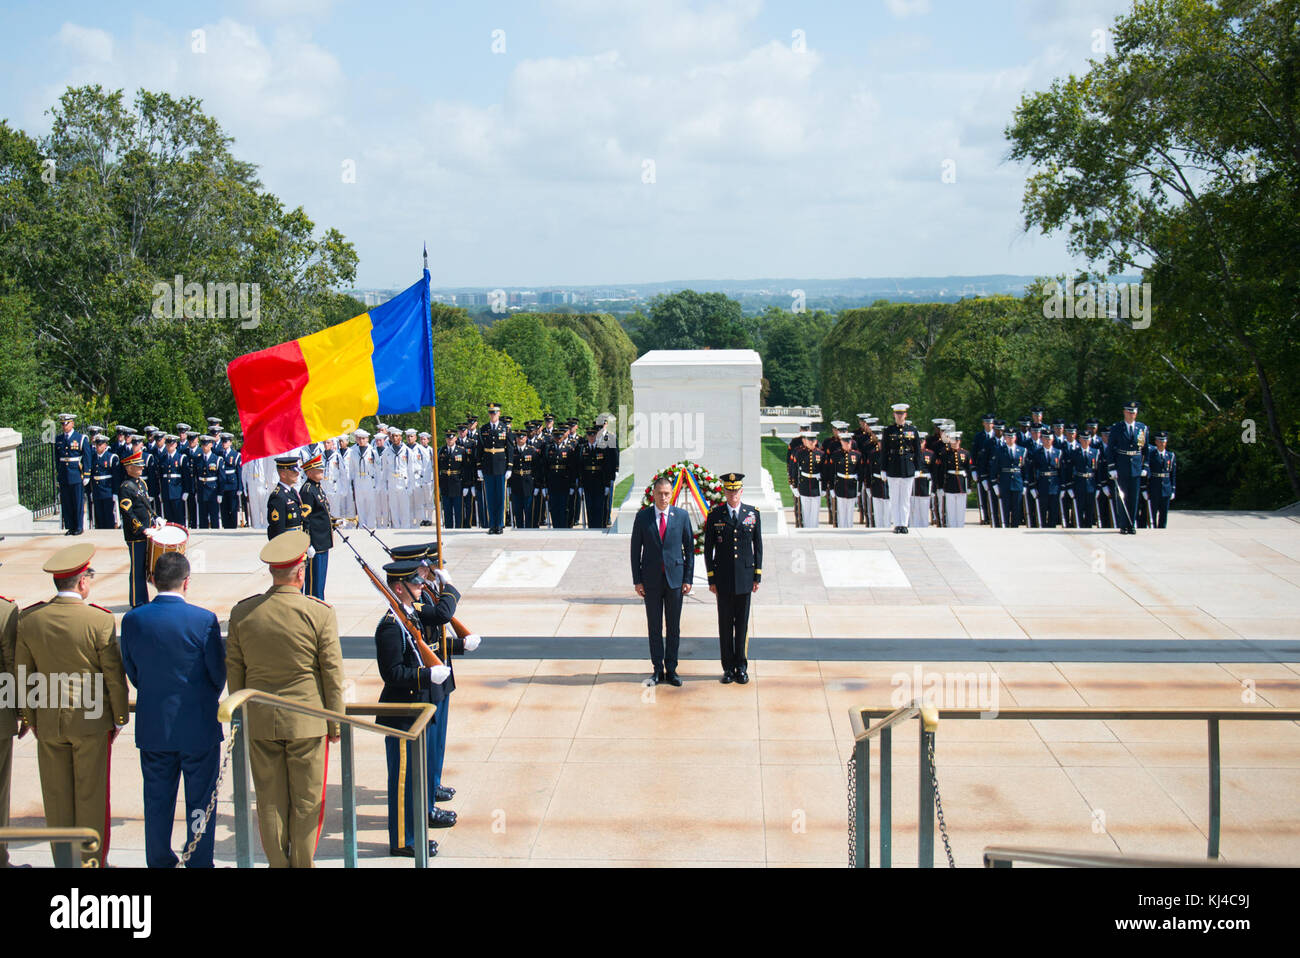 His Excellency Mihai Fifor, Romanian Minister of National Defence, Participates in an Armed Forces Full Honors Wreath-Laying Ceremony at the Tomb of the Unknown Soldier as Part of His Official Visit to the US (37189667241) Stock Photo